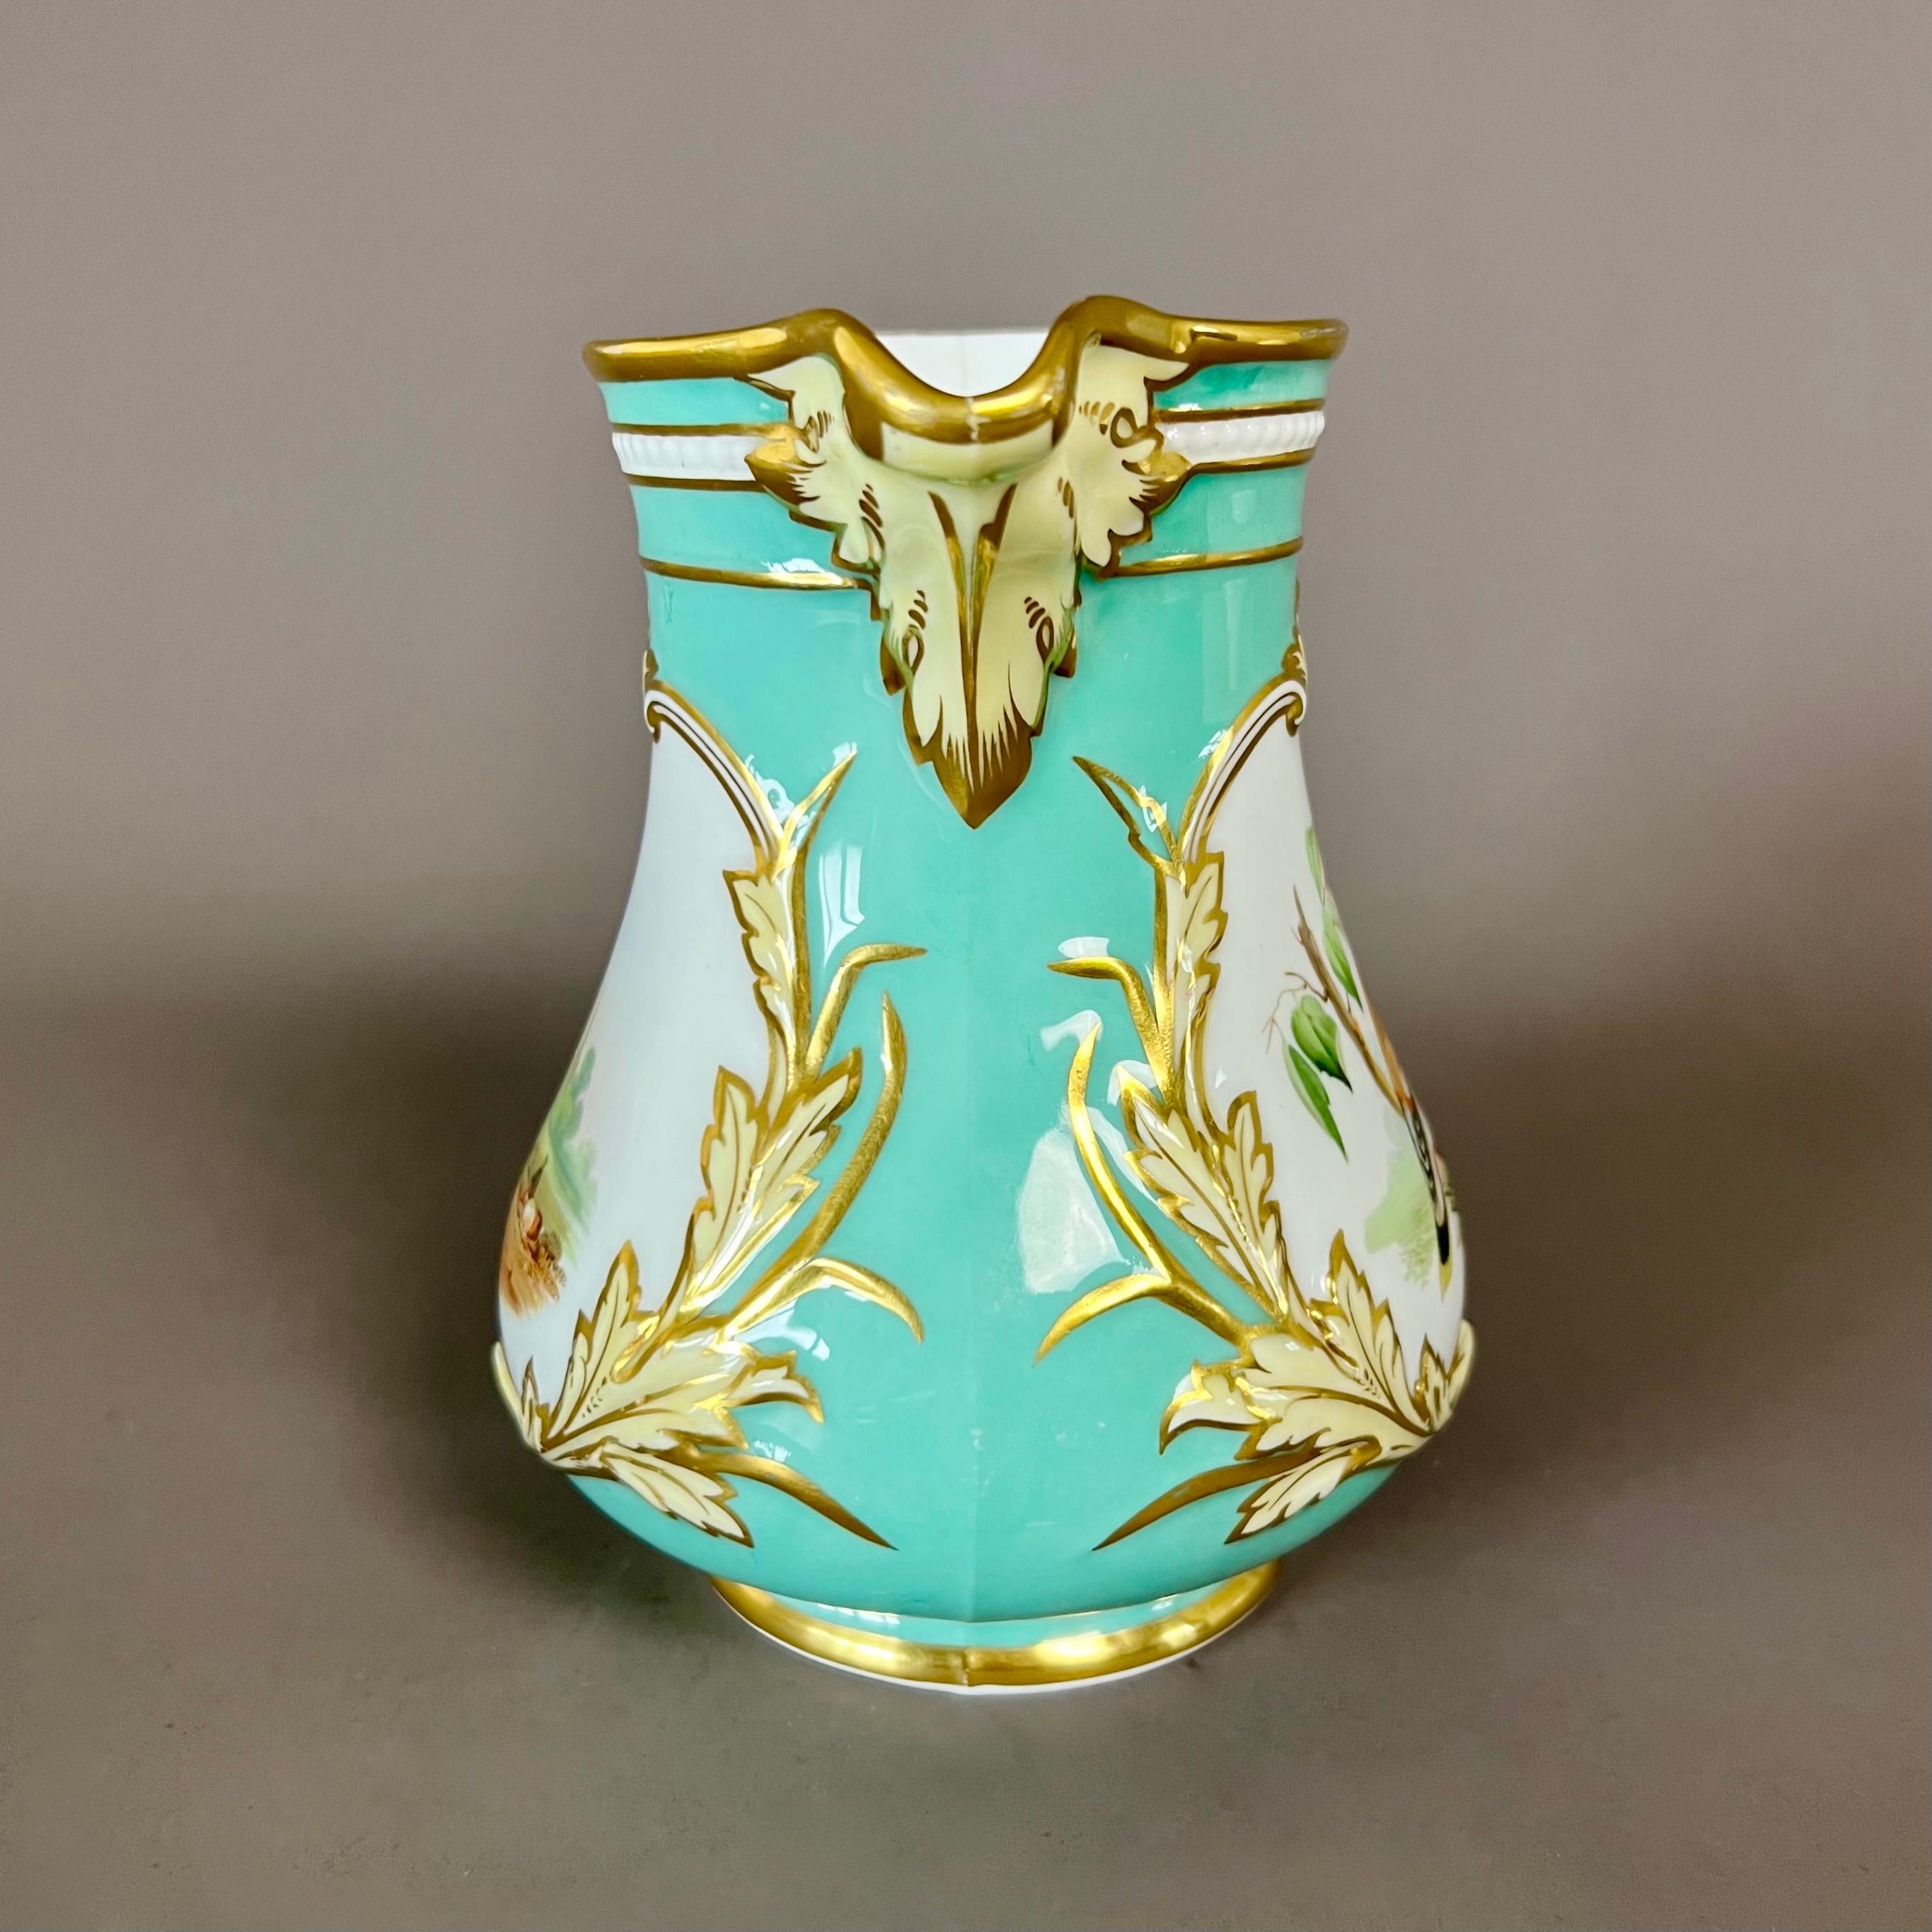 A cream or water jug / pitcher with elegant scrolled moulding, an eau de nil ground colour with yellow and gilt leafy scrolls, with a jay on one face and a landscape on the other

Pattern unknown
Year: 1854
Size: 143m (5.1”) from handle to mouth,